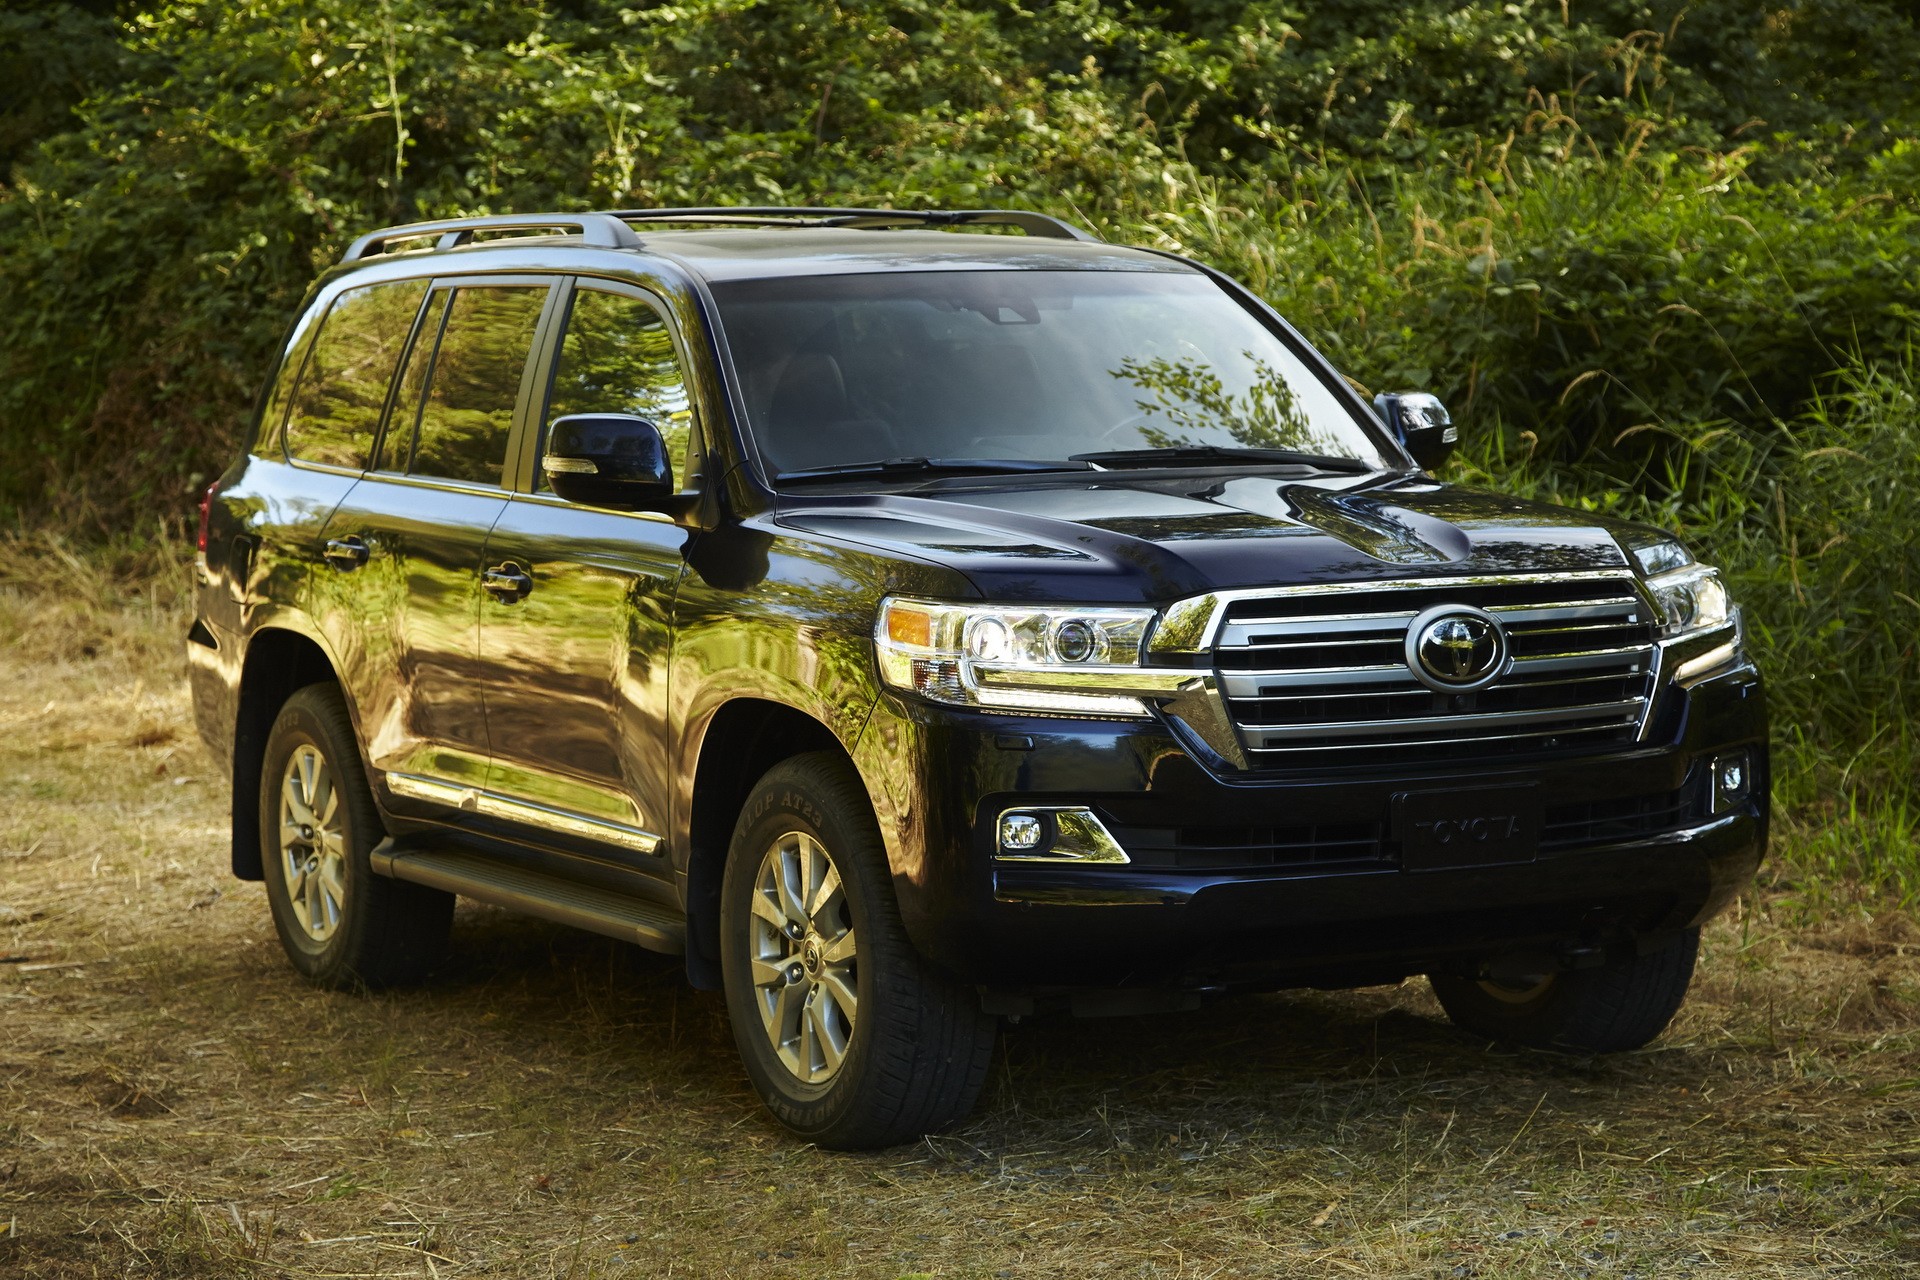 Toyota Land Cruiser Gets More Expensive For the 2019 Model